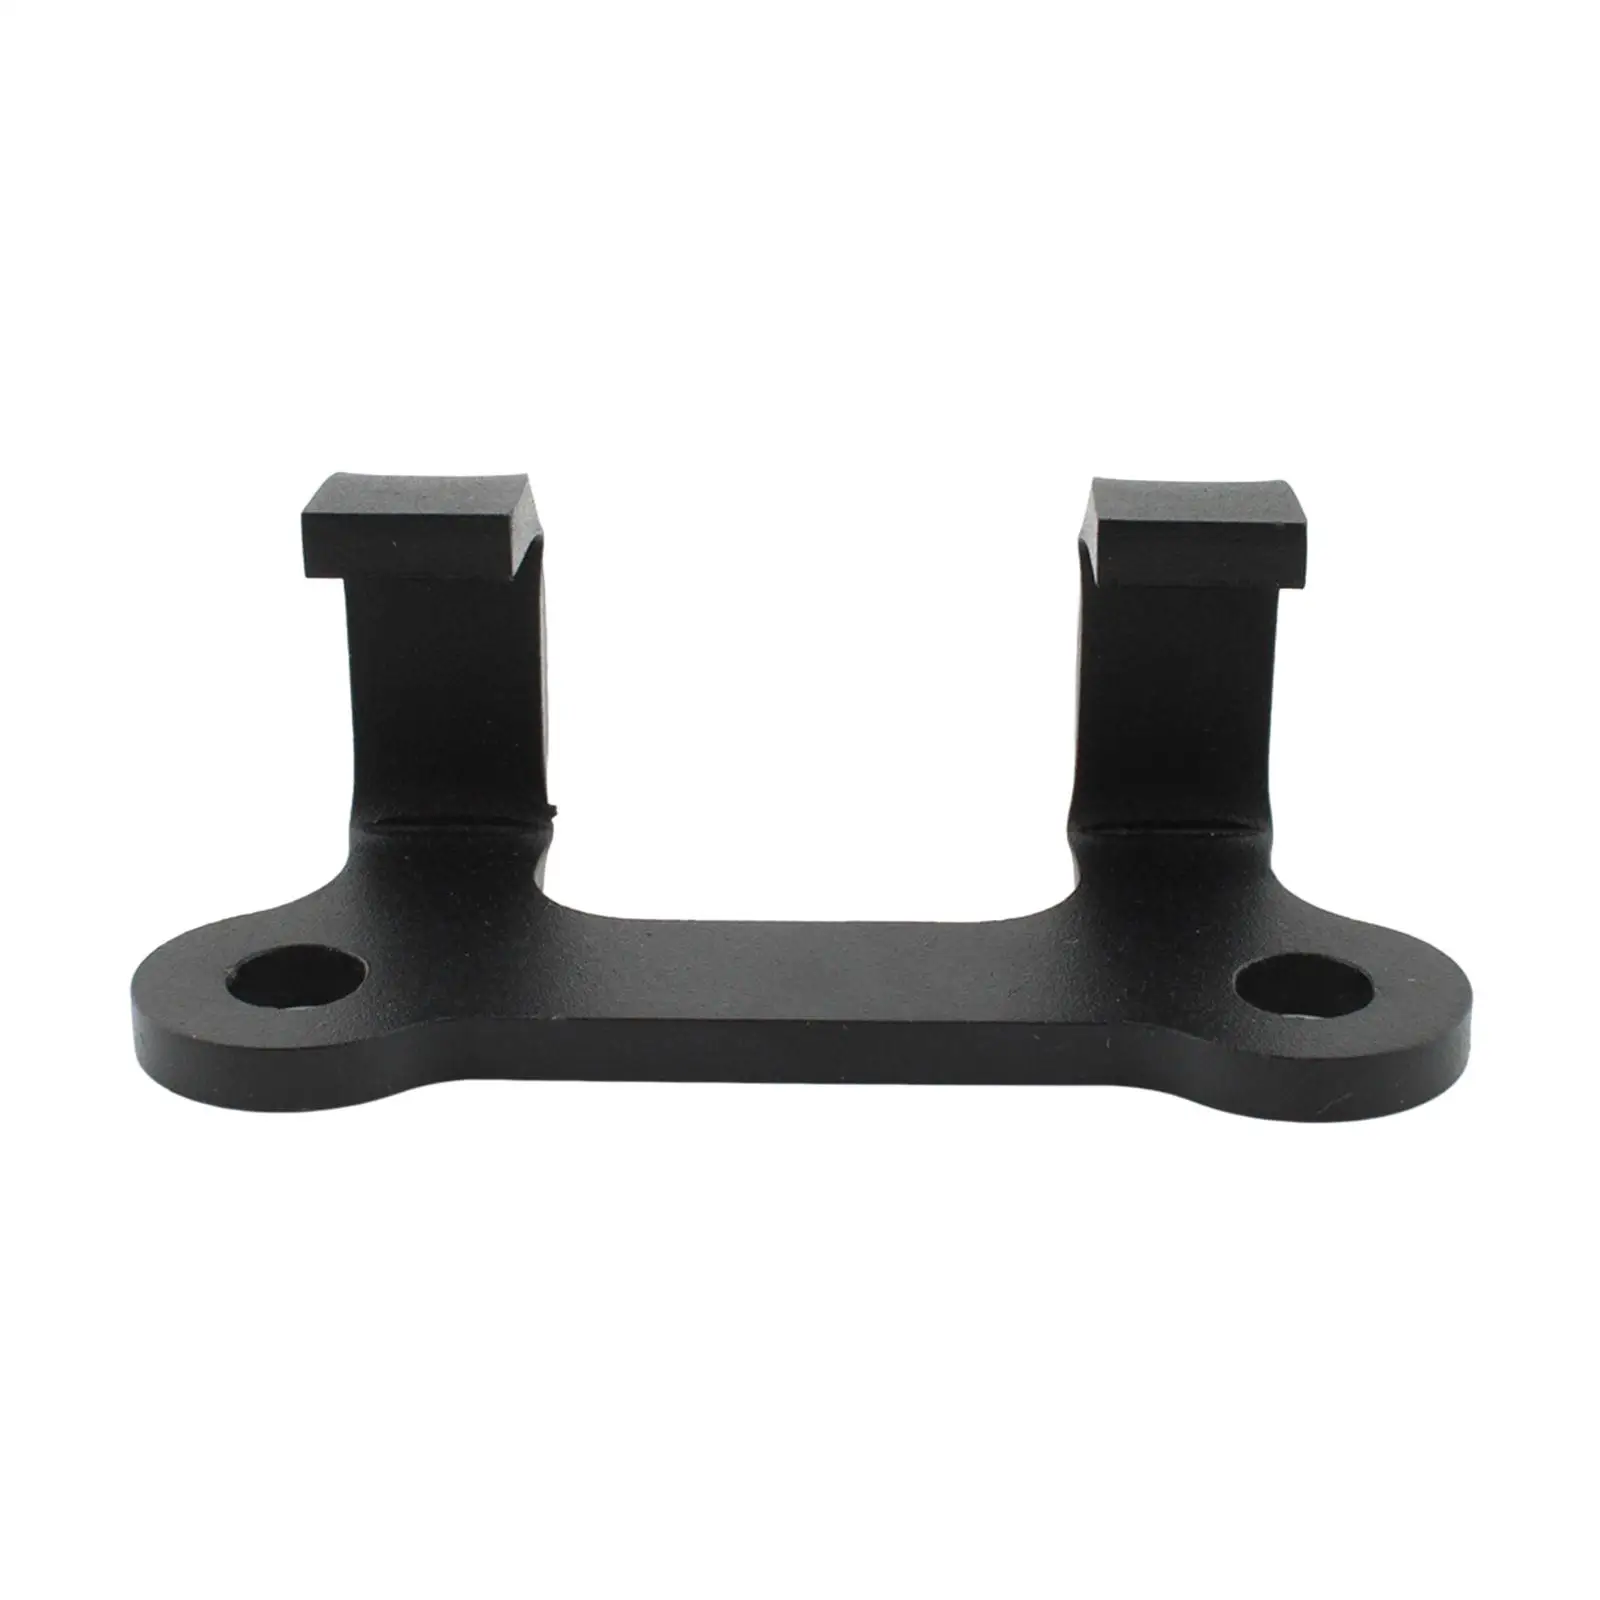 Front Headlight Mount Bracket Aluminum Alloy Mounting Support for Honda GB350 NC59 Accessory Easy Installation